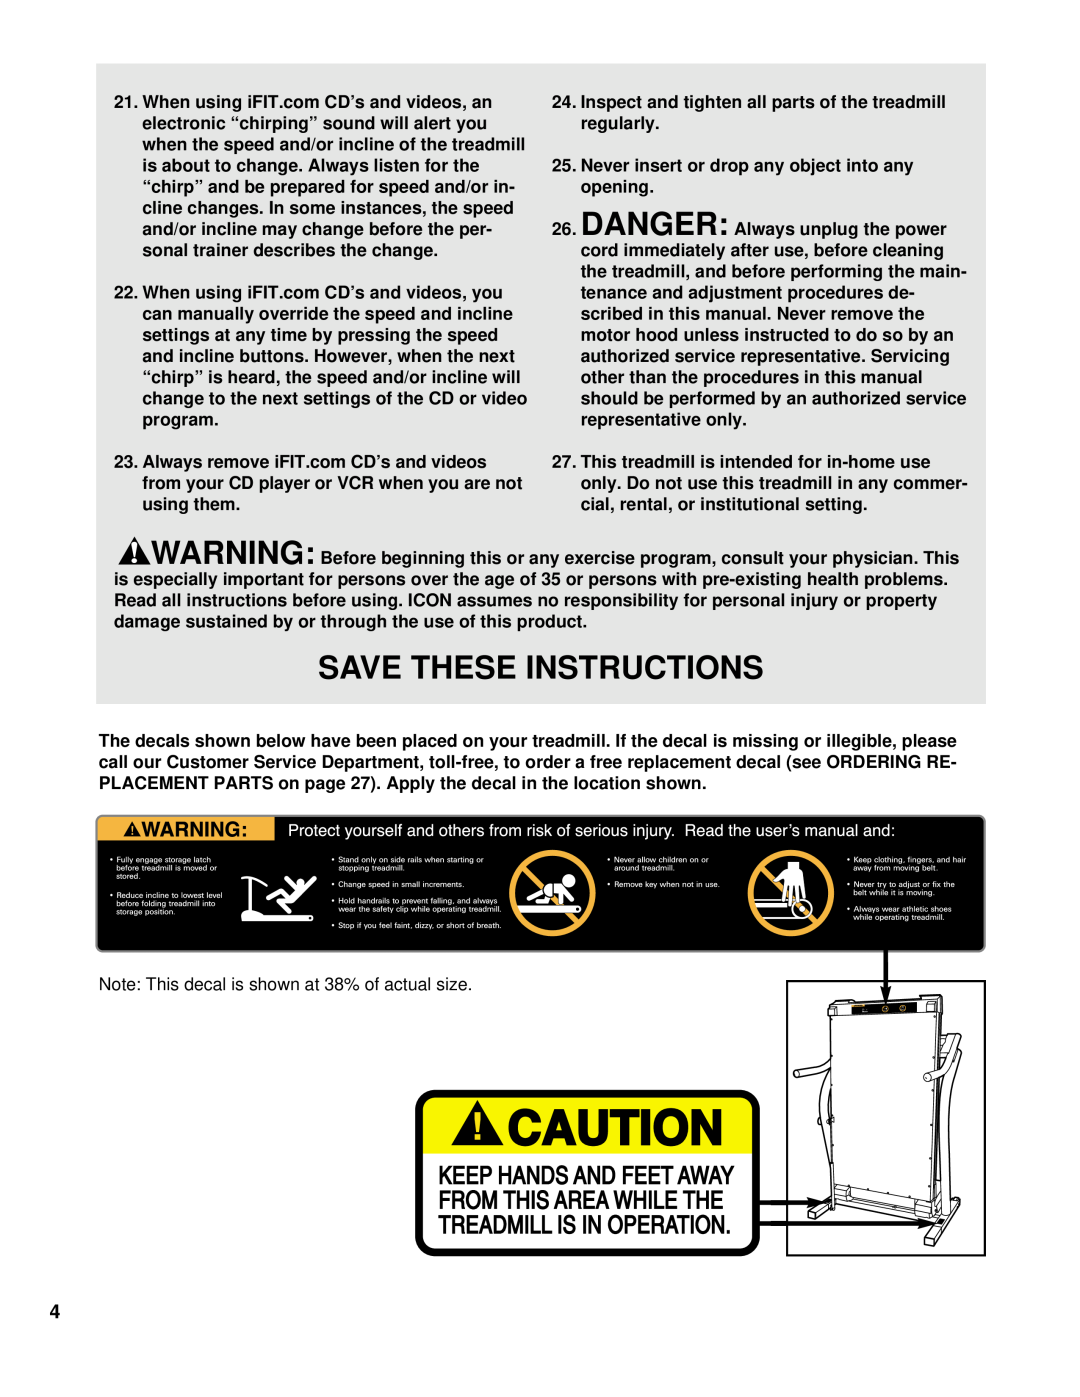 NordicTrack NTTL09994 user manual Save These Instructions, Inspect and tighten all parts of the treadmill regularly 